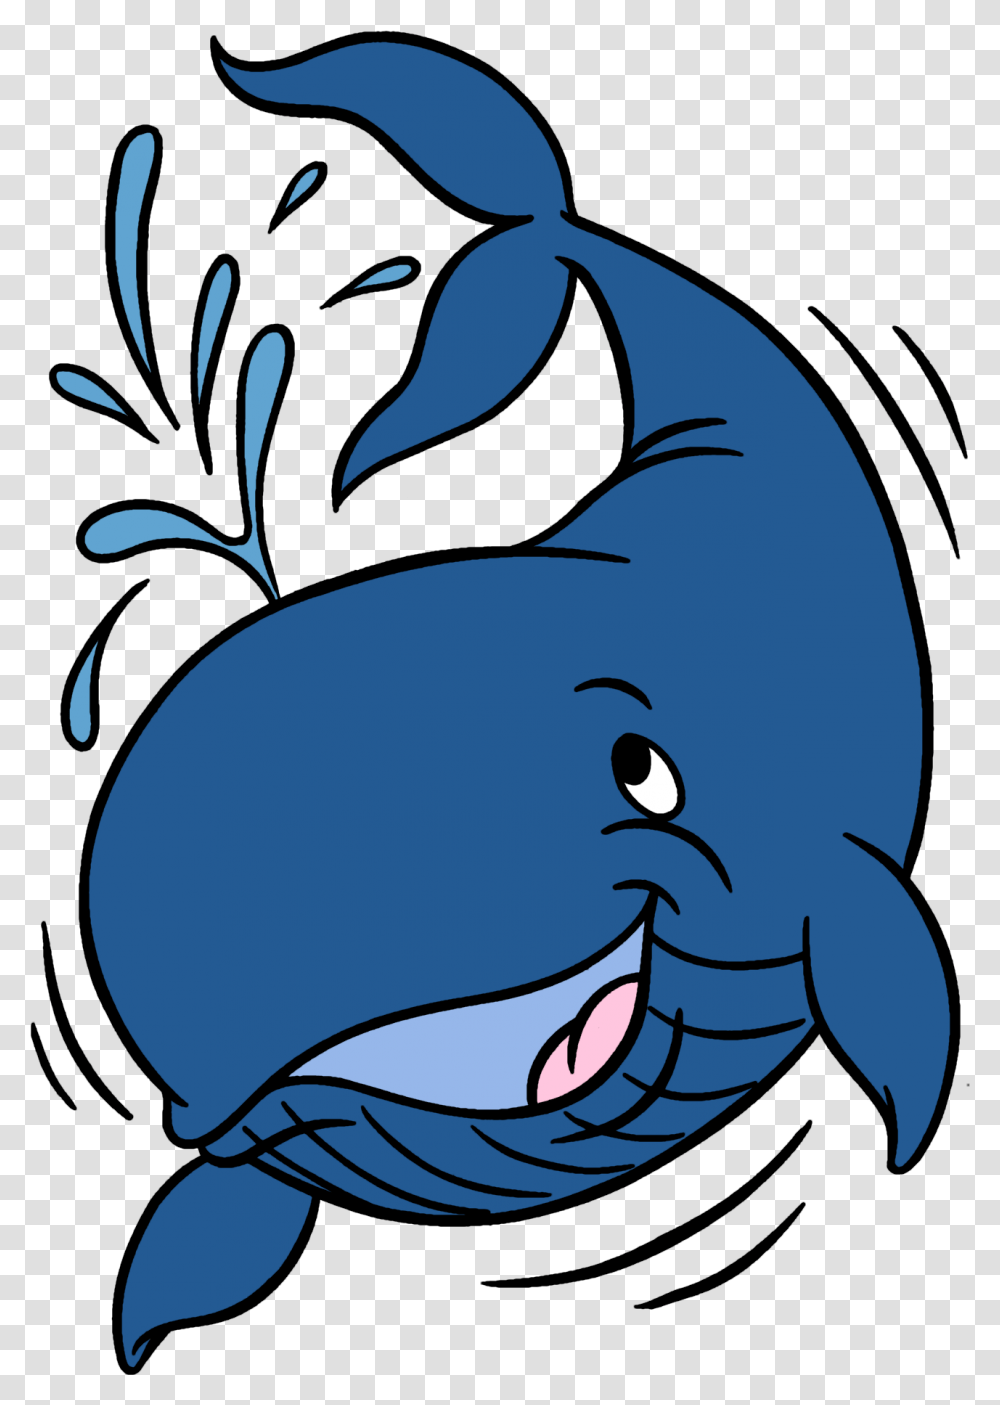 Whale Clipart Fishing Cartoons Clip Art Whale Cartoon Whale Background, Mammal, Animal, Sea Life Transparent Png